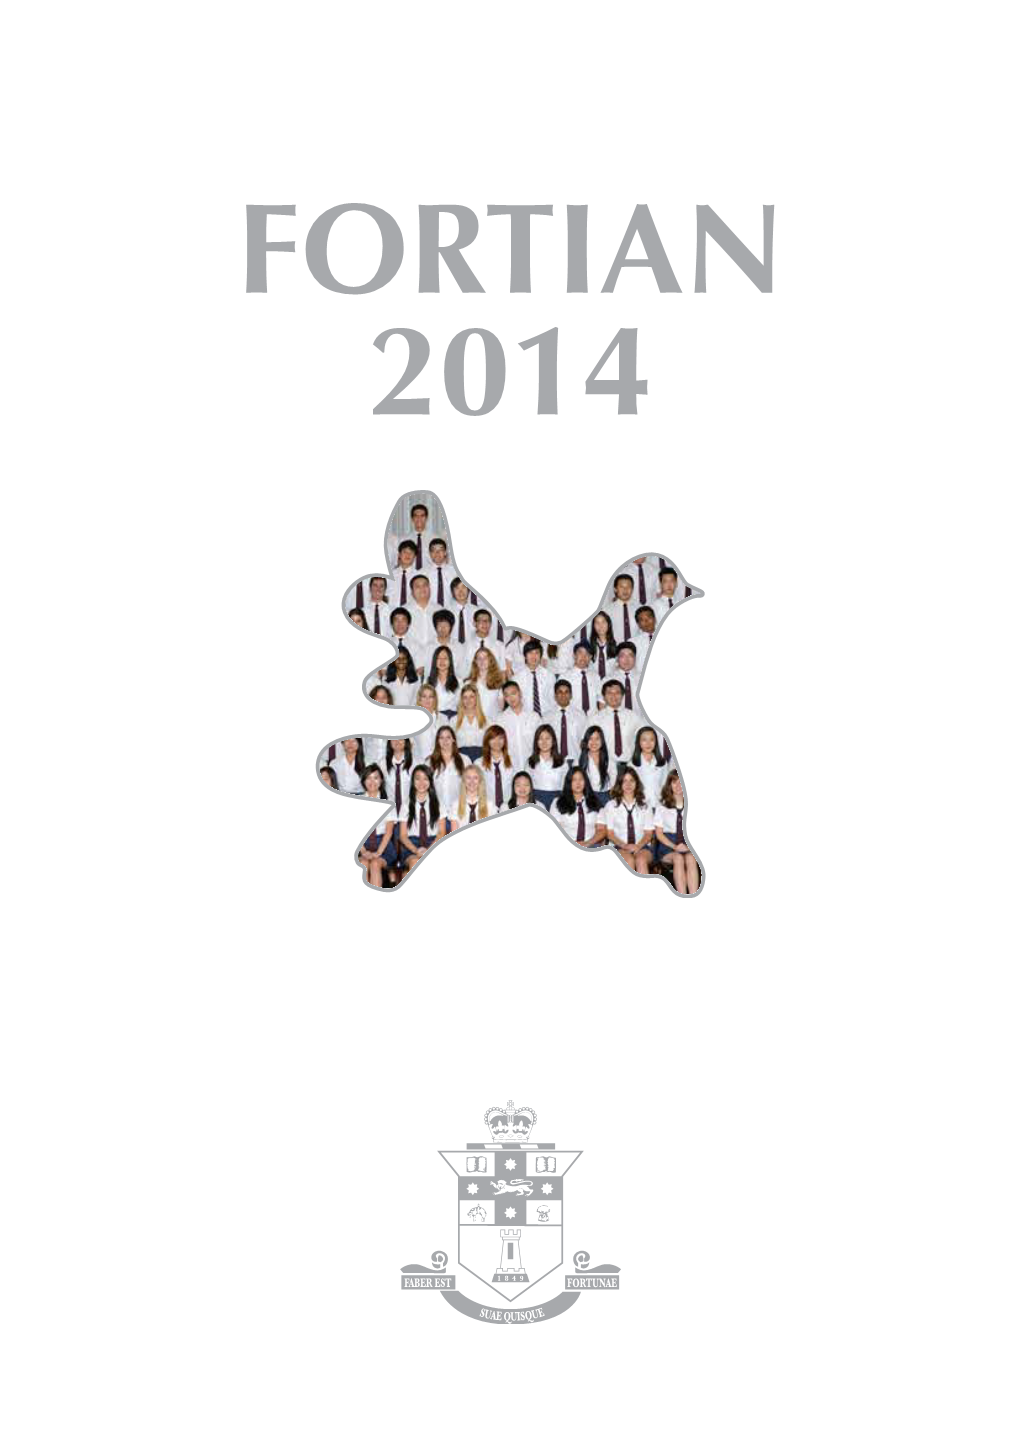 The Fortian 2014